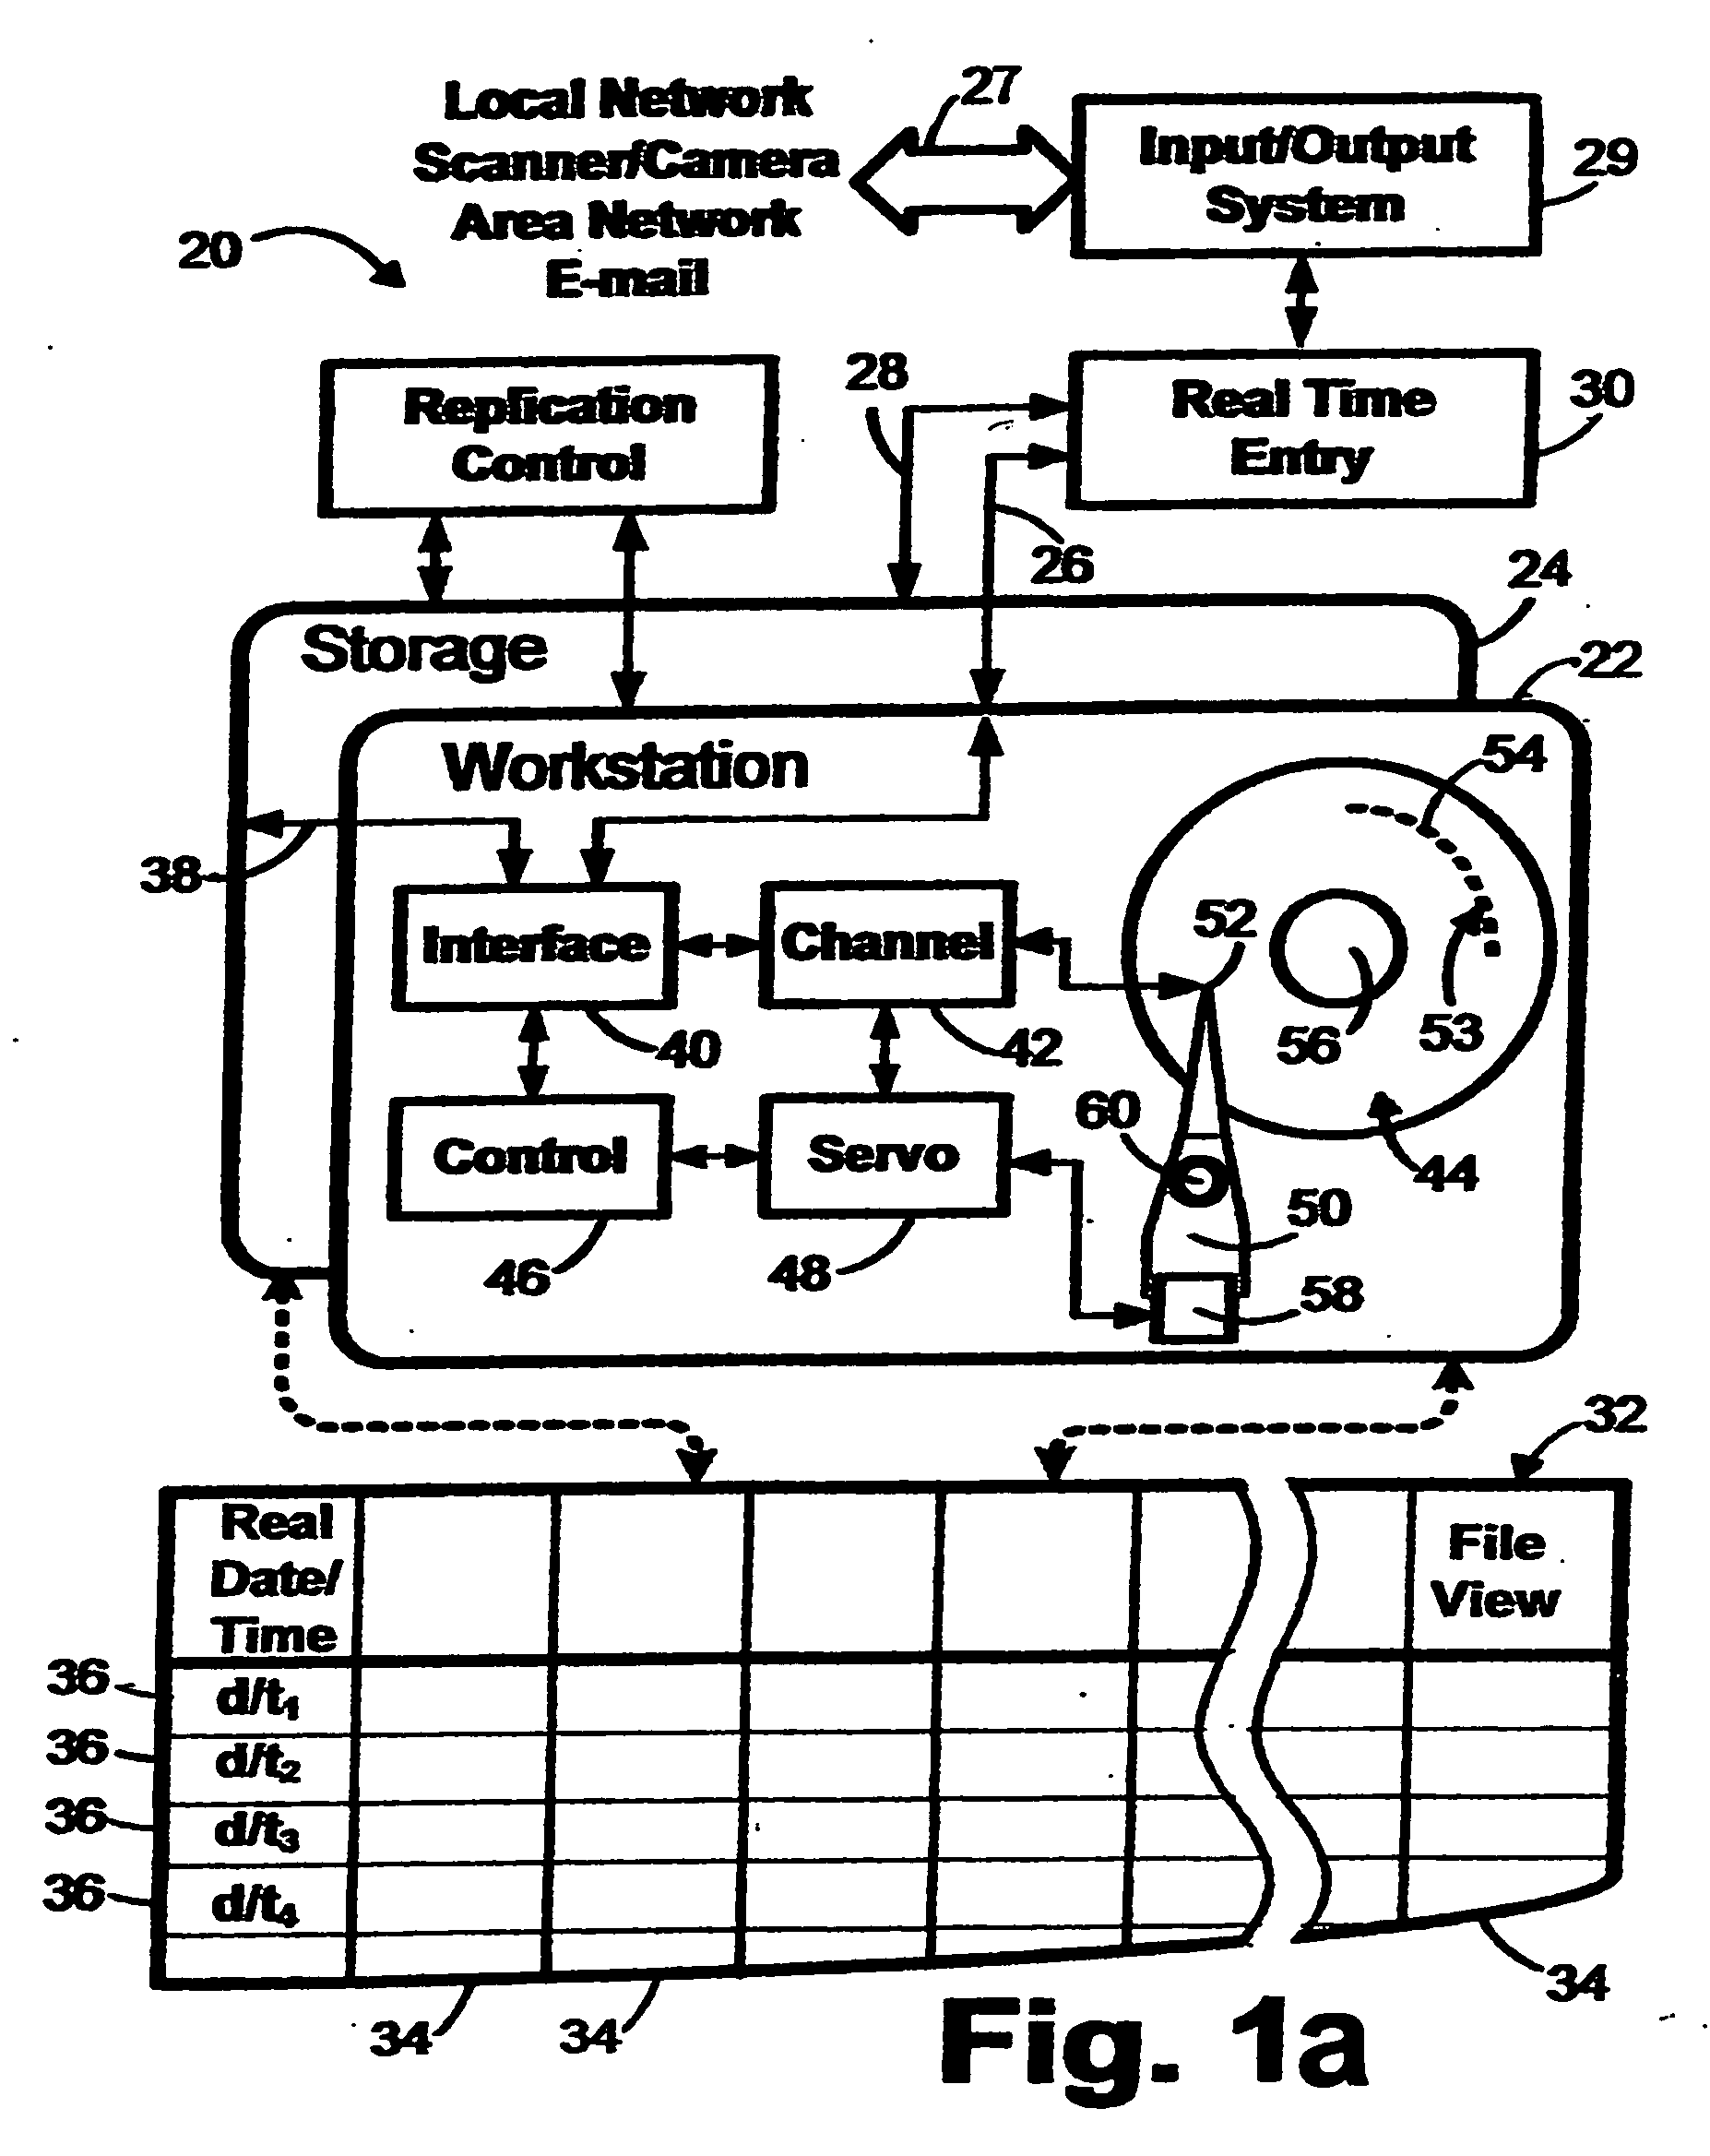 Systems, processes, and products for storage and retrieval of electronic files